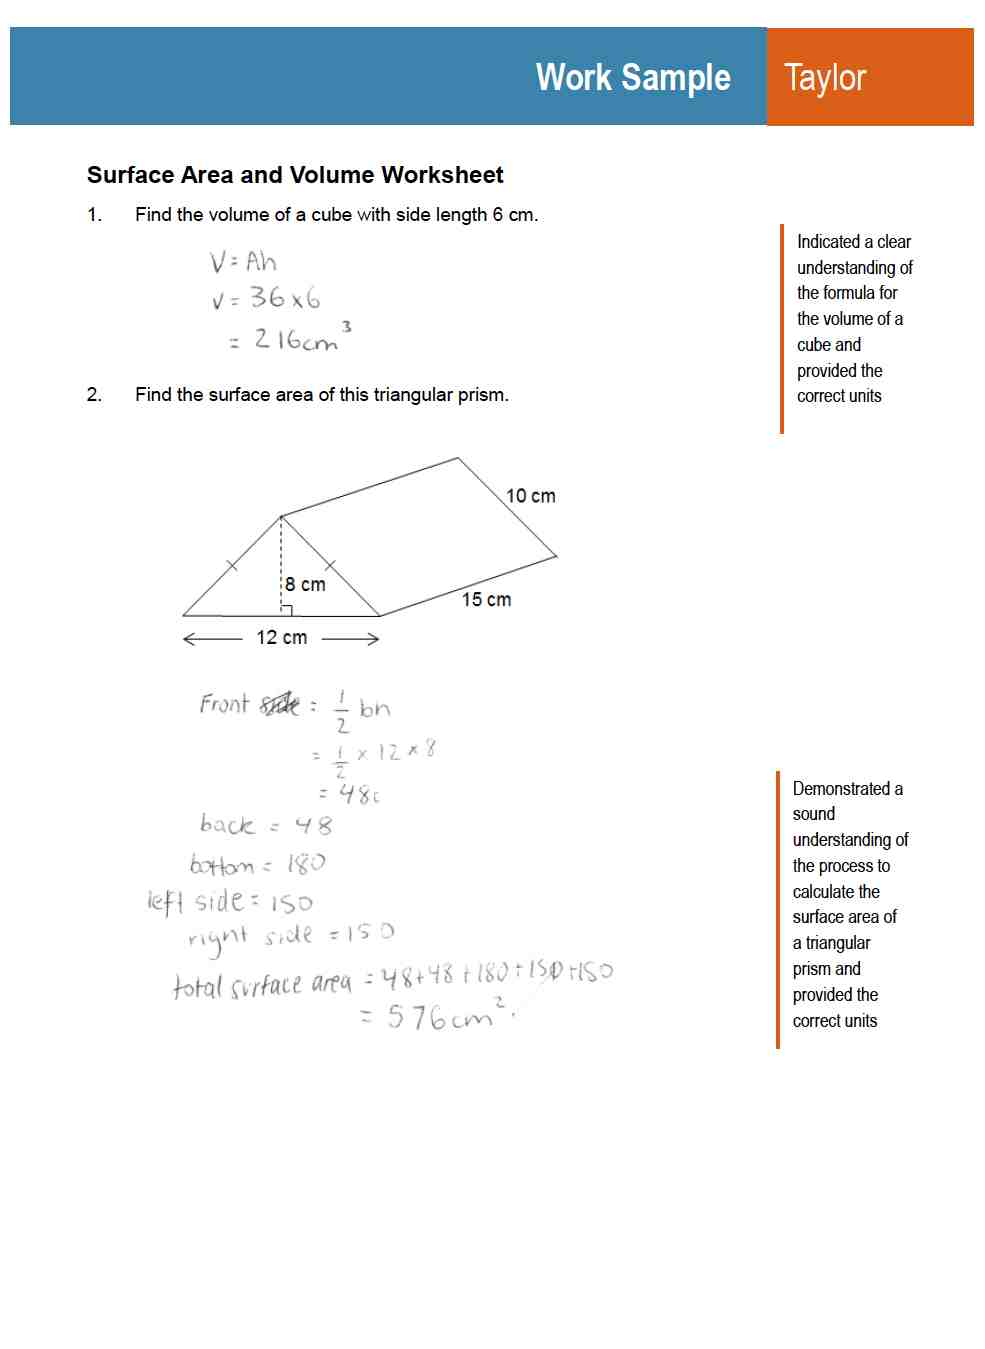 Surface Area and Volume - Taylor